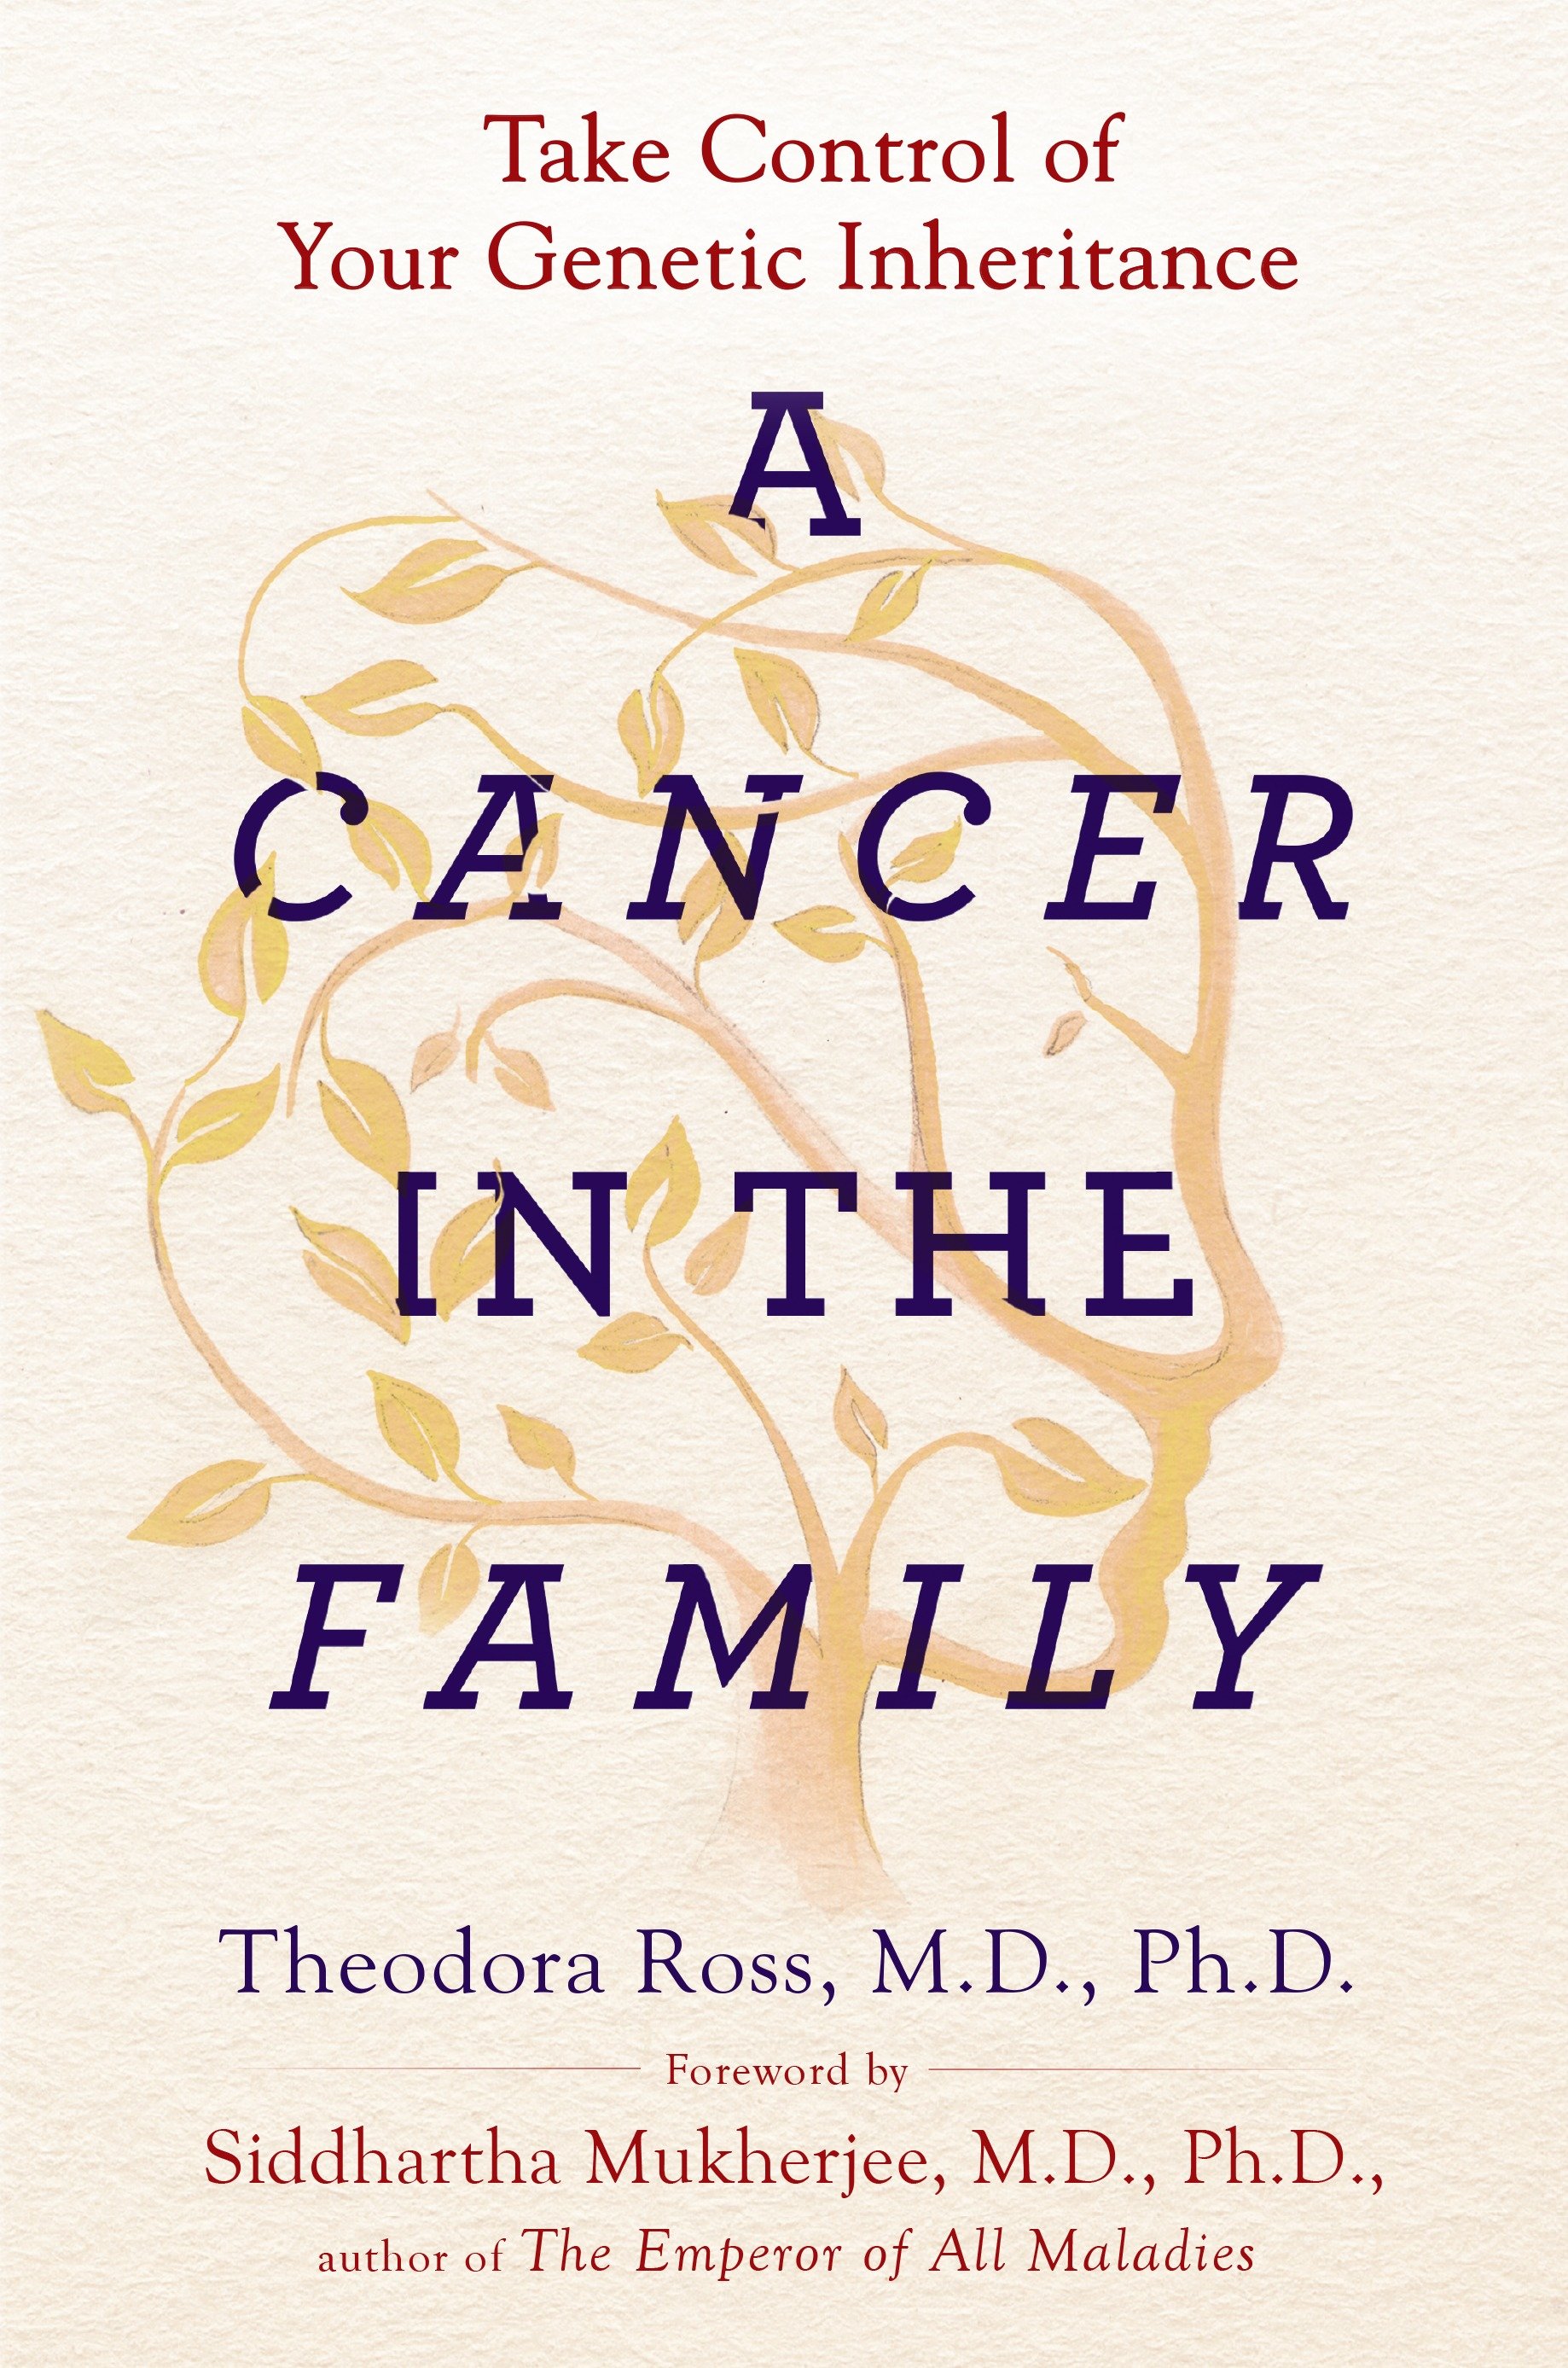 Image de couverture de A Cancer in the Family [electronic resource] : Take Control of Your Genetic Inheritance